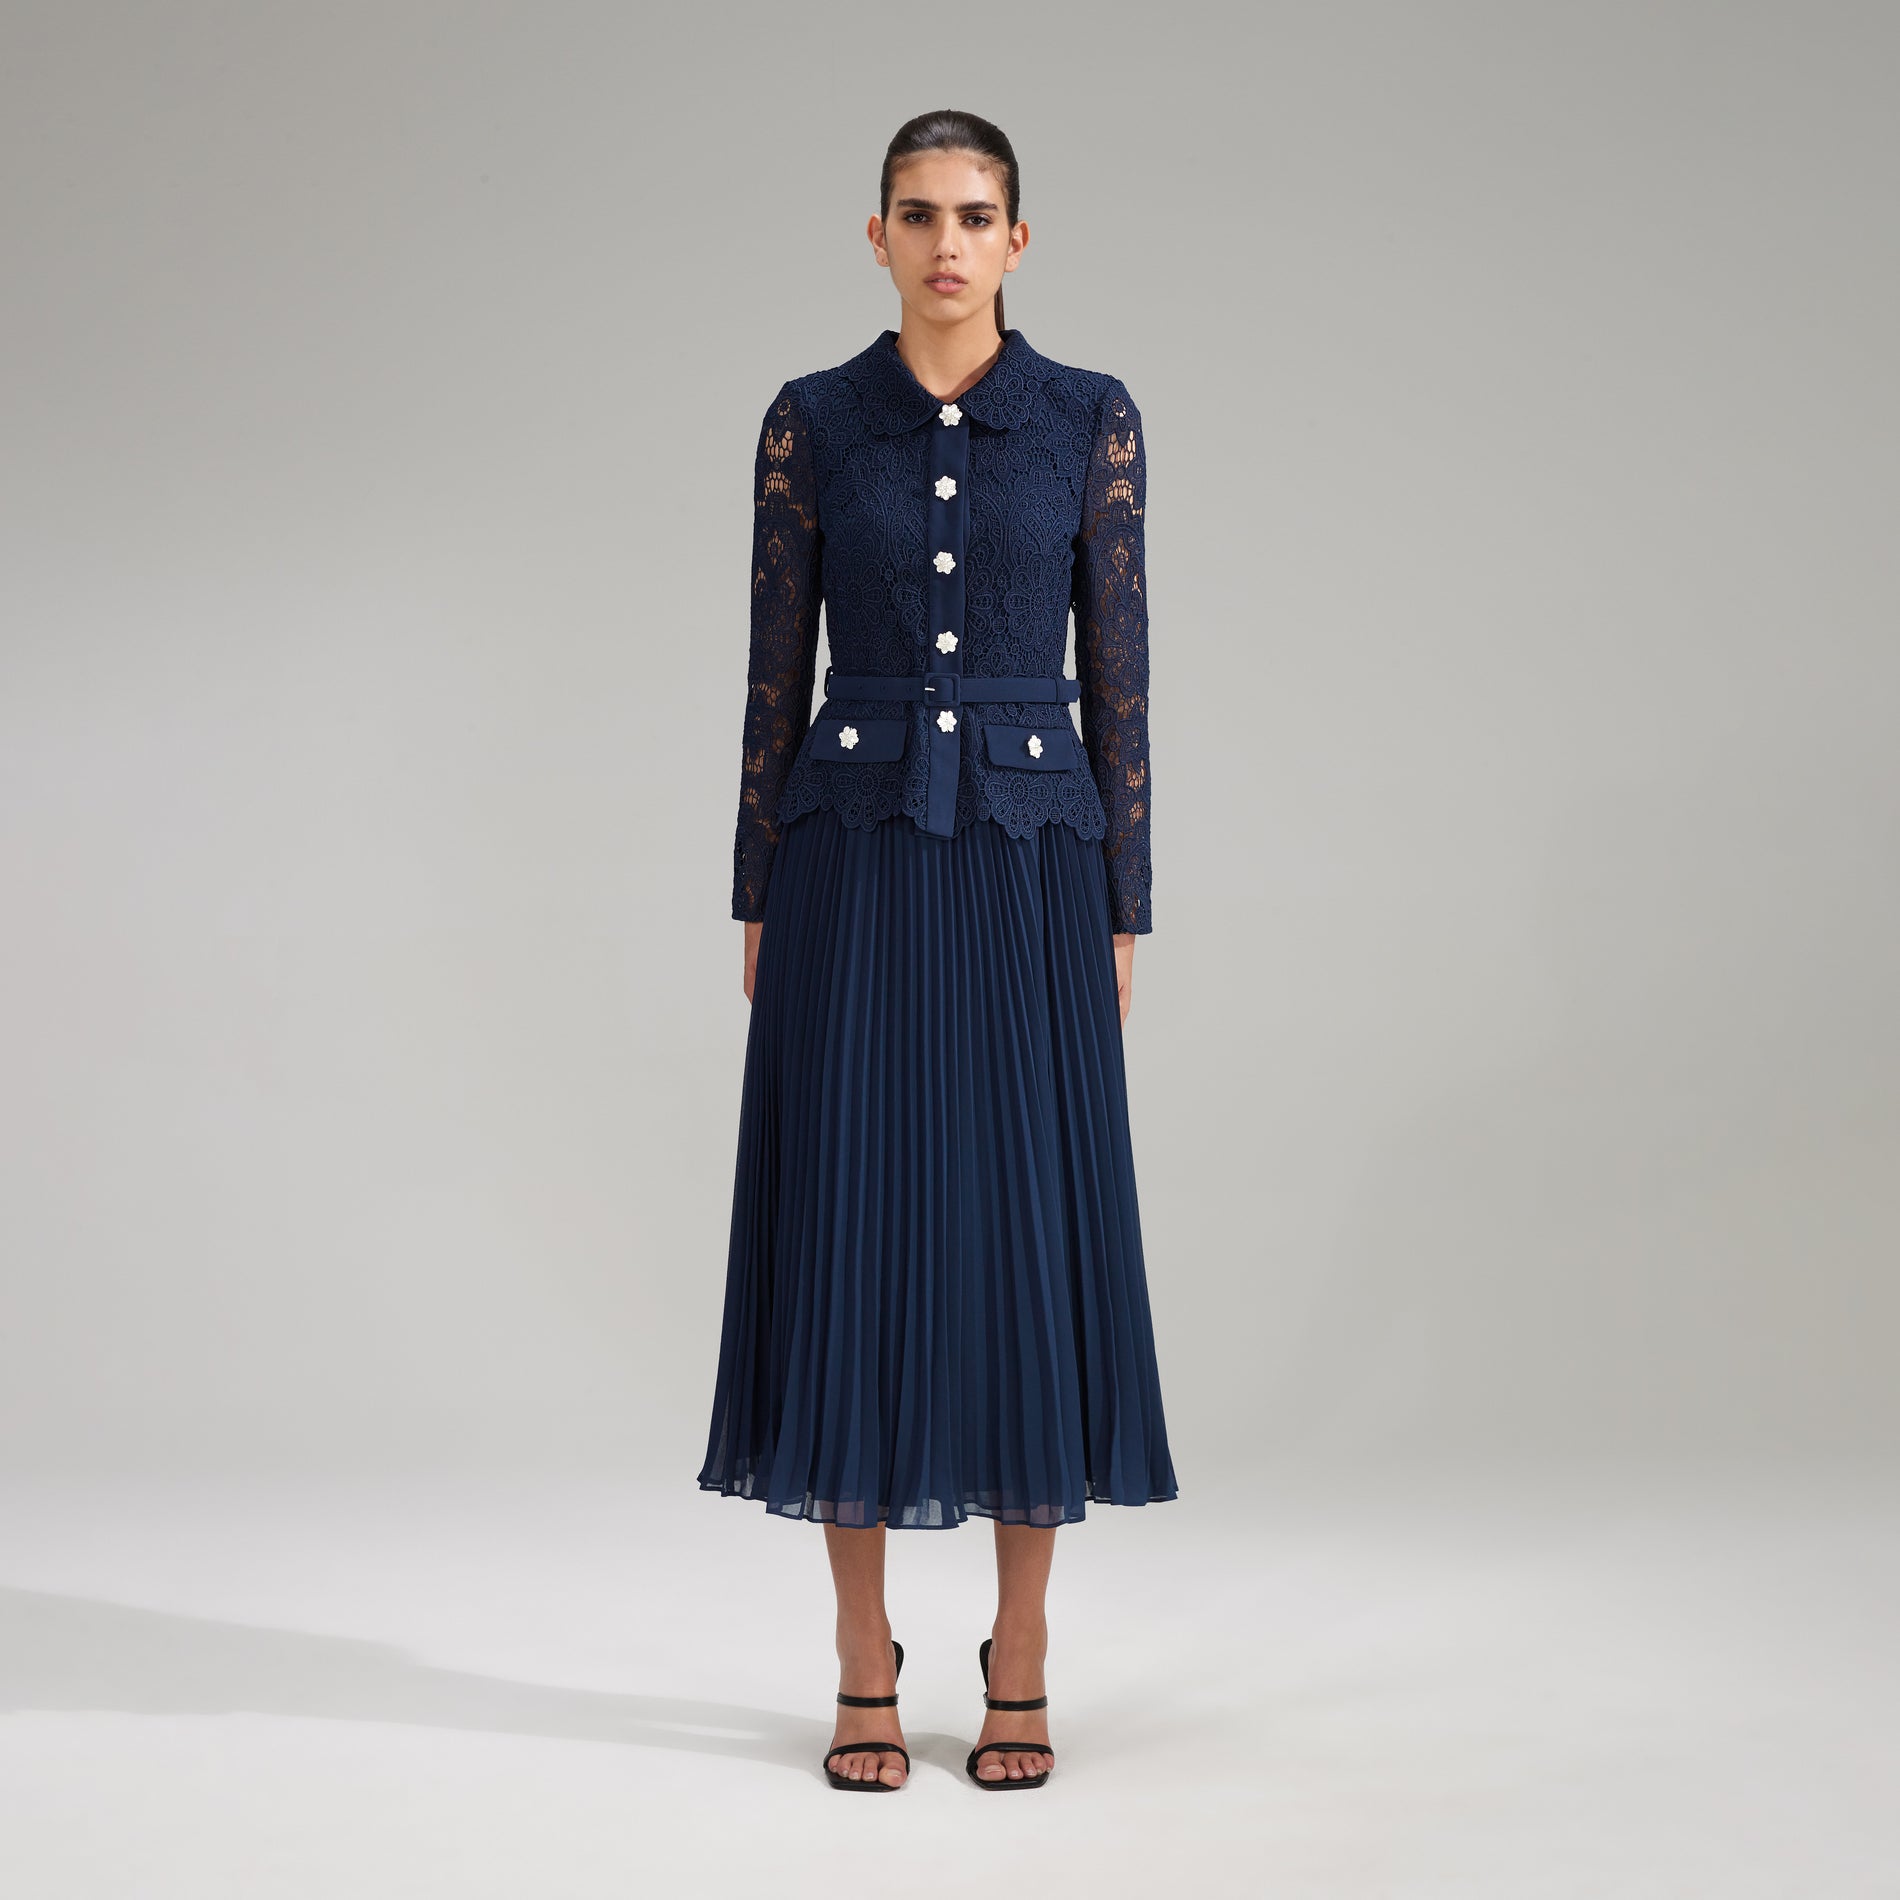 A woman wearing the Navy Guipure Lace Midi Dress